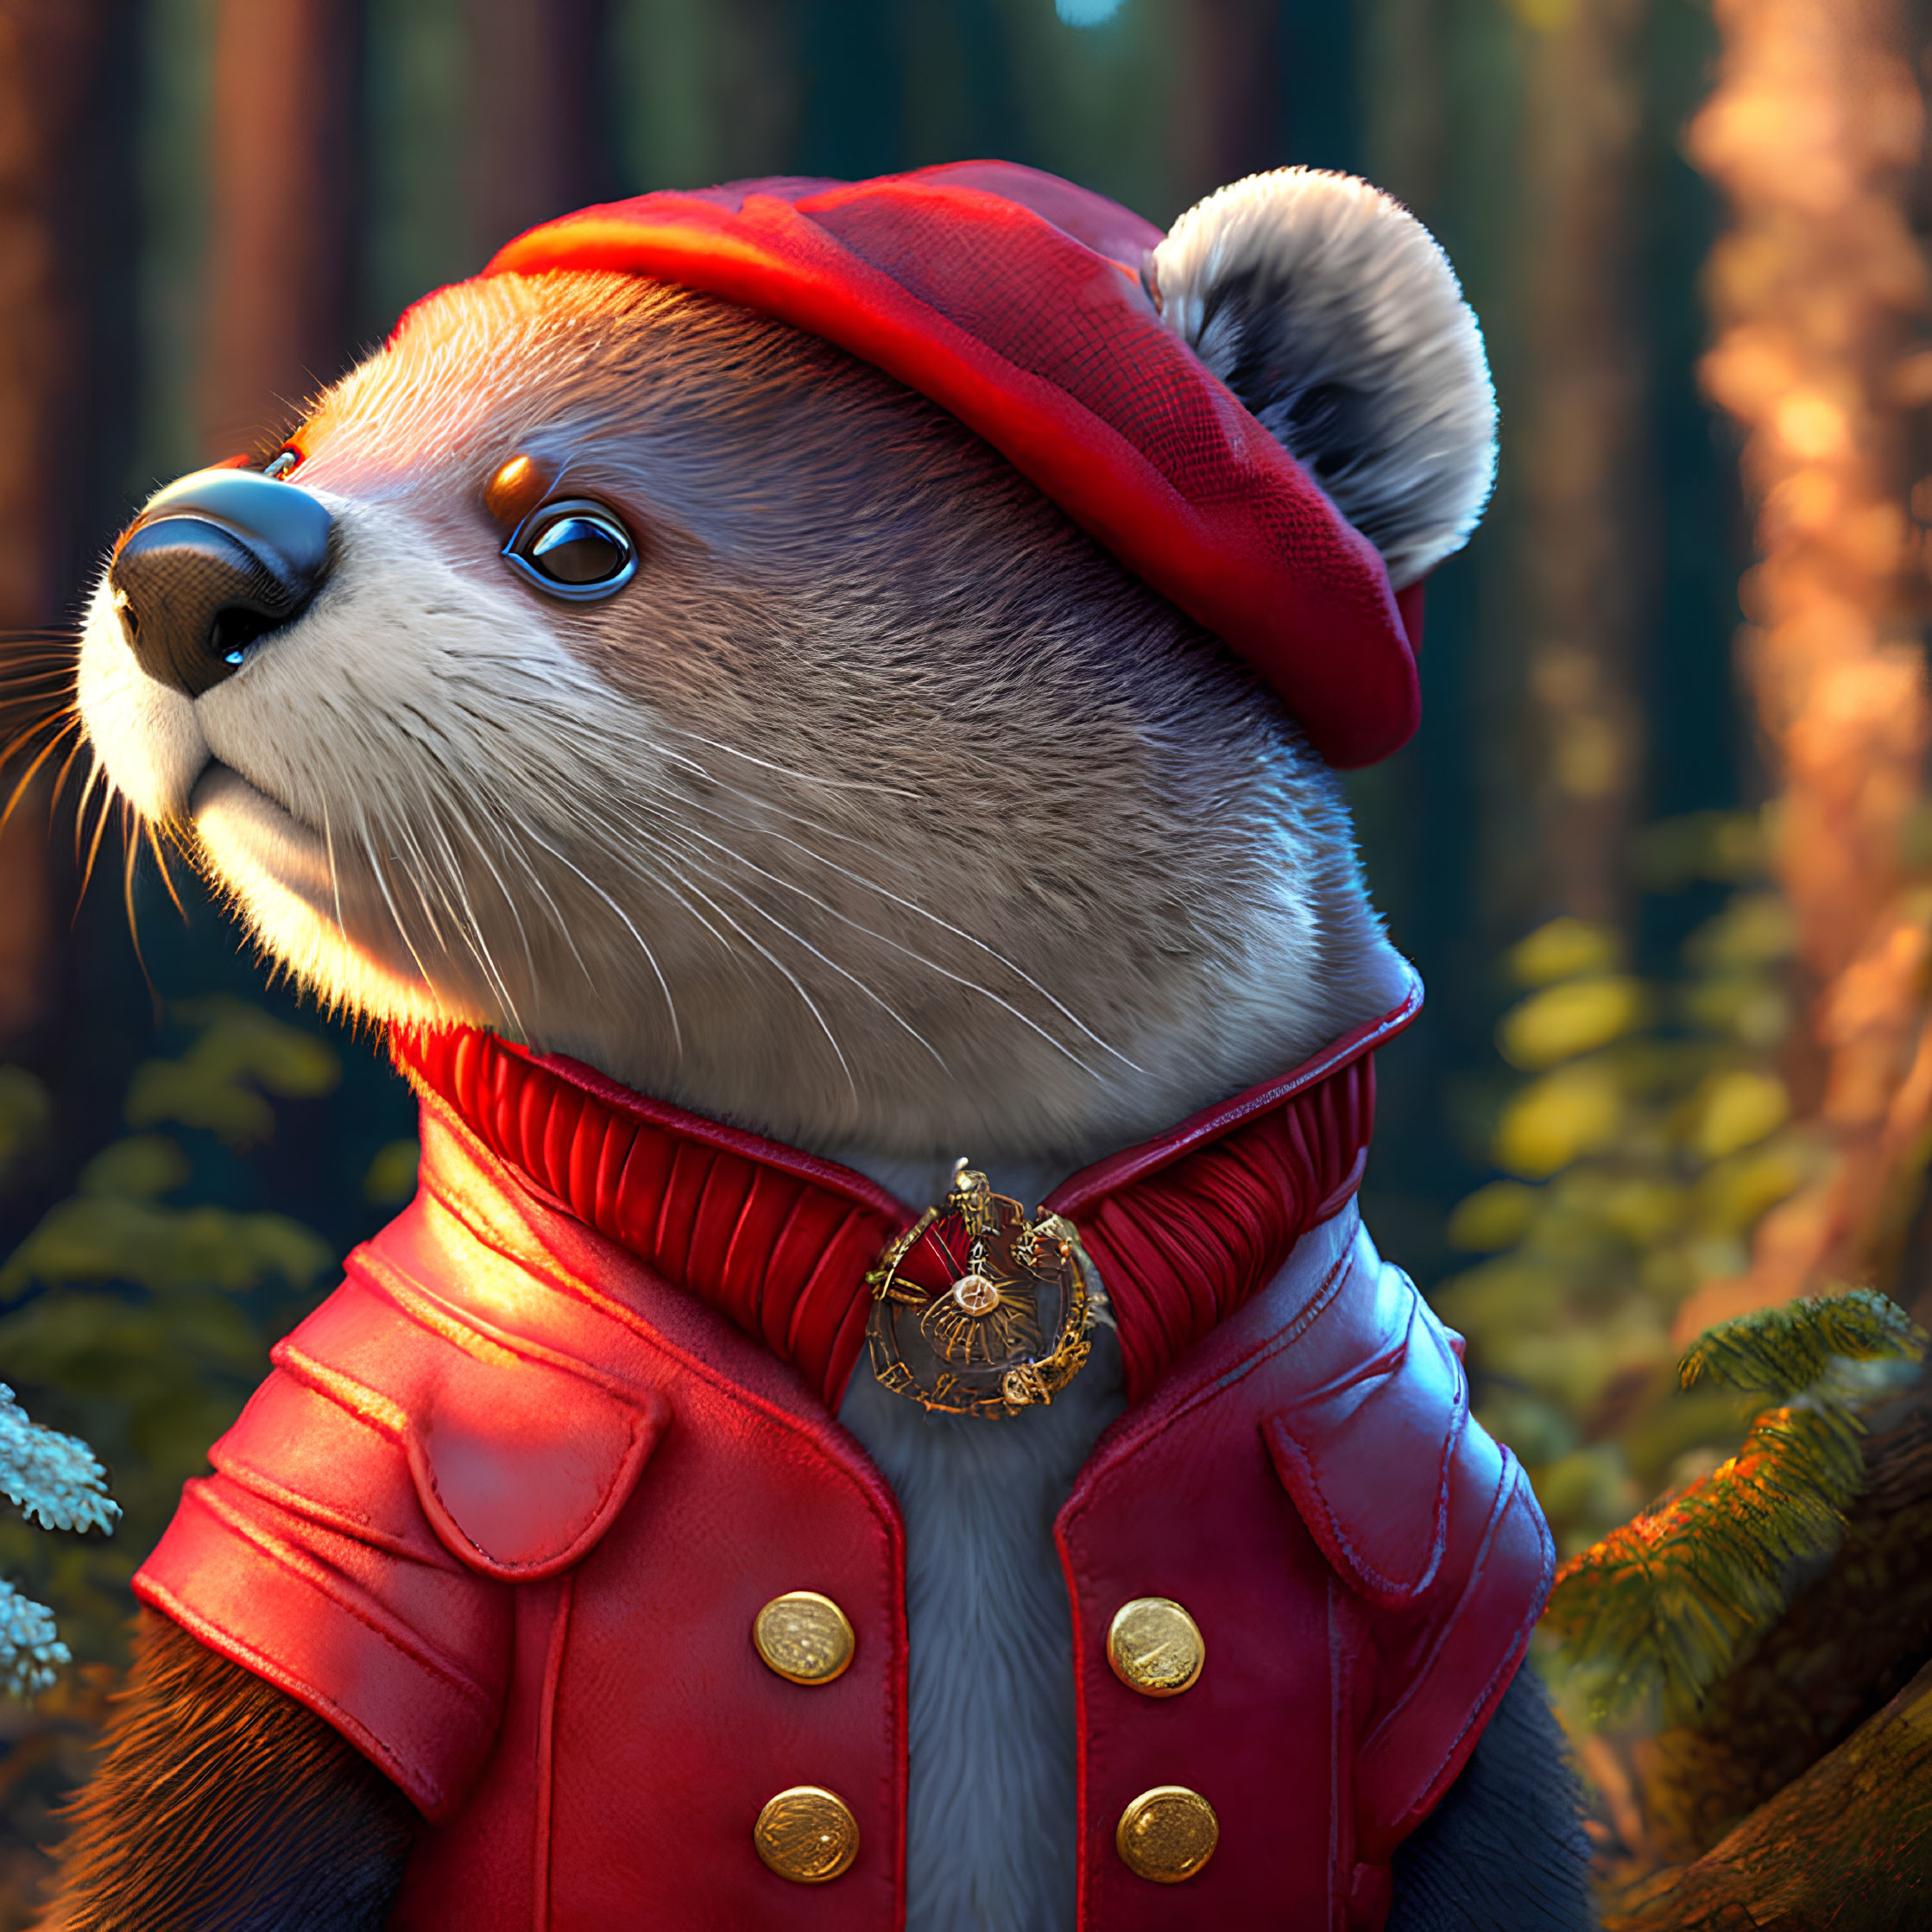 Anthropomorphic otter in red beret and leather jacket against forest backdrop